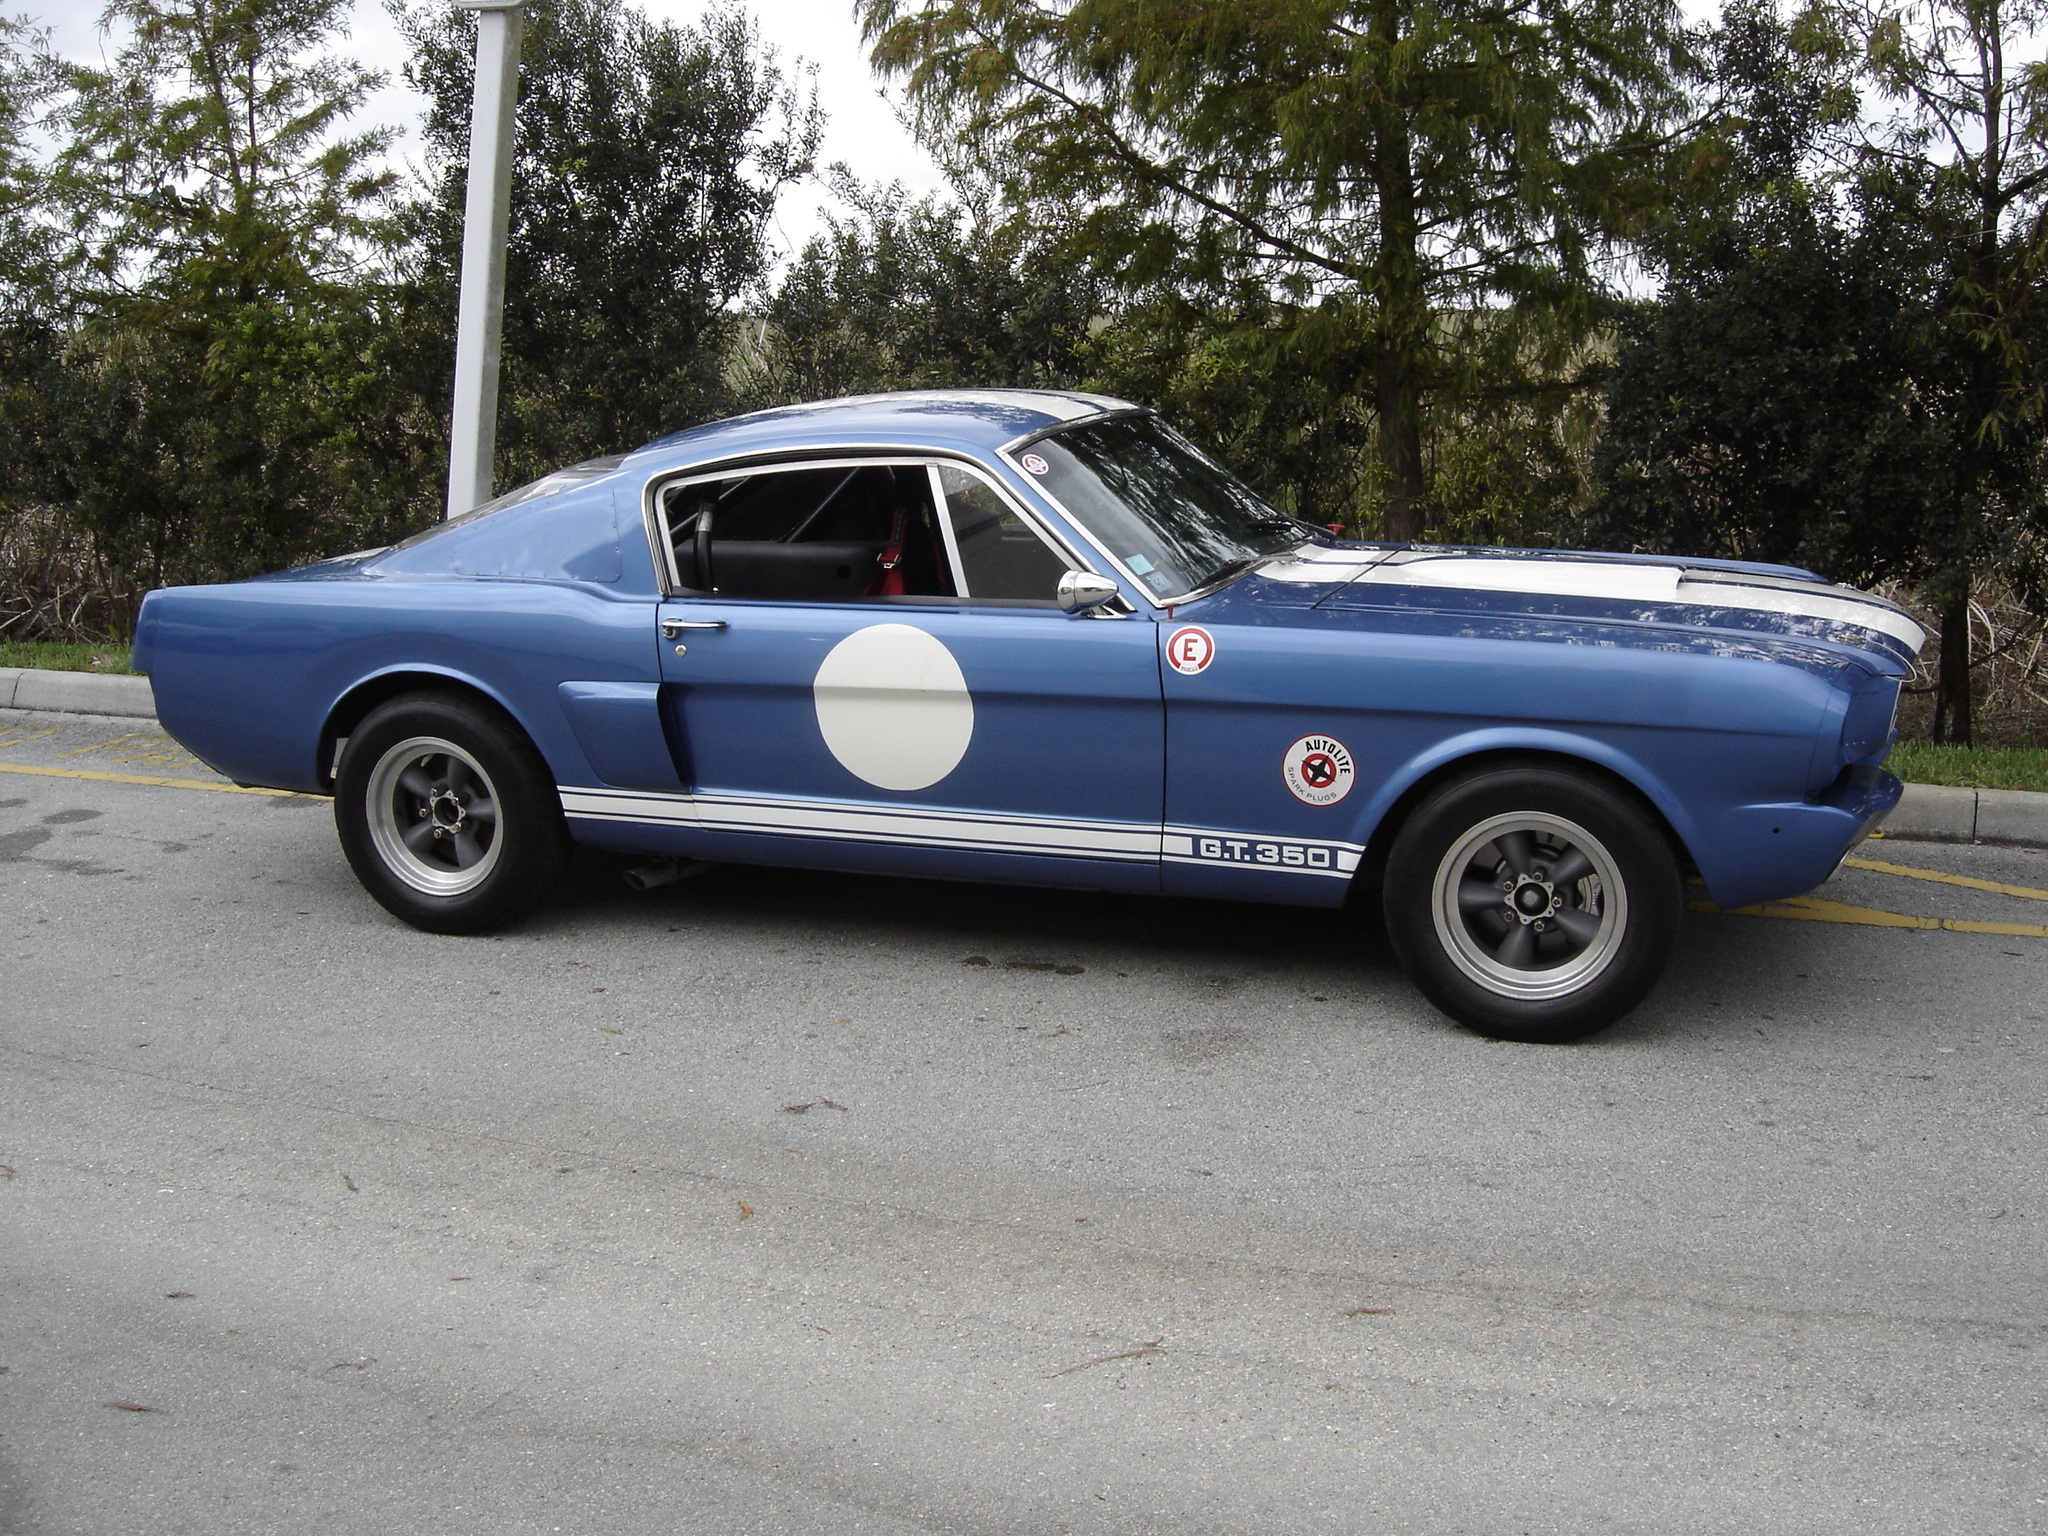 Cars Wallpaper on Cars Road 1967 Race Ford Mustang Shelby Gt350 Fastback 1965 1966 Gt